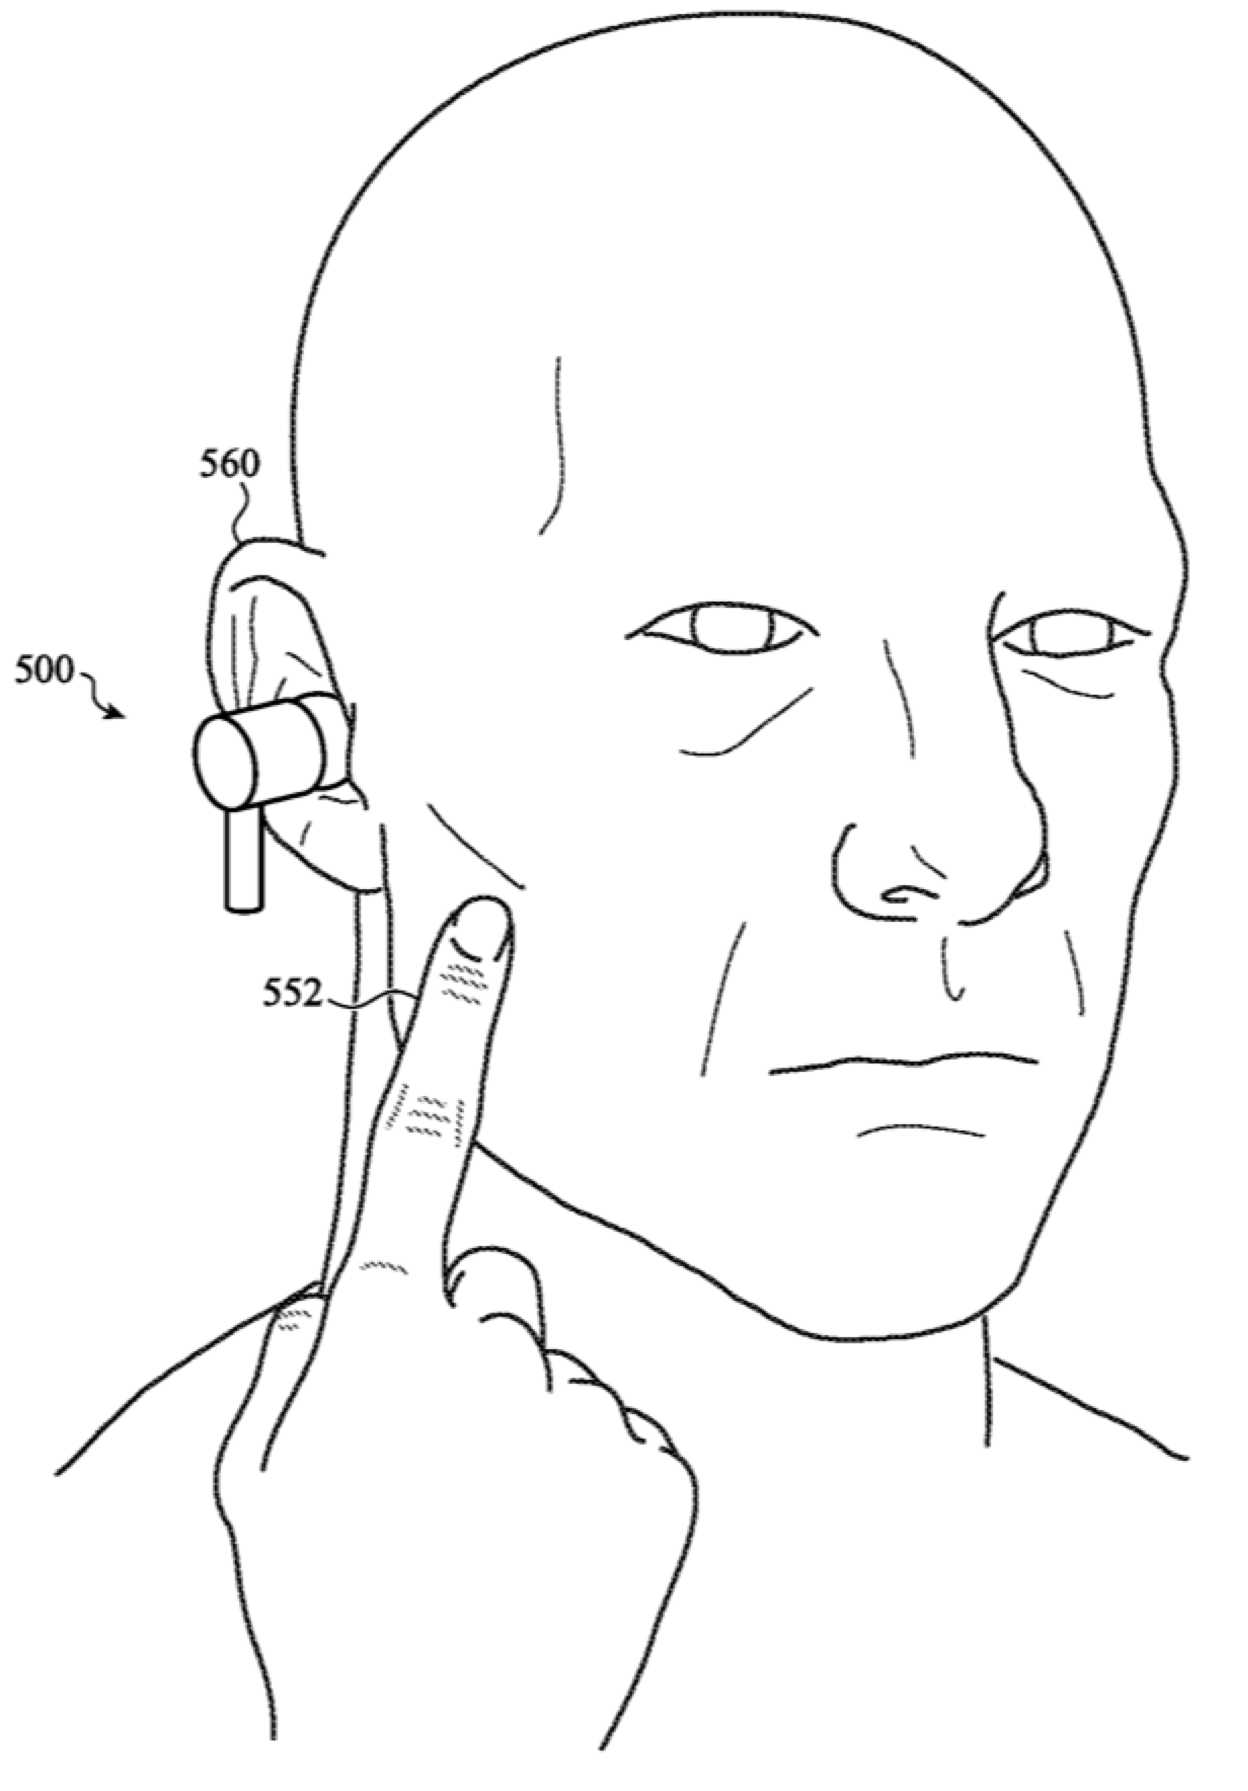 Apple-patent-AirPods-Pro-in-air-control-gestures-drawing-001